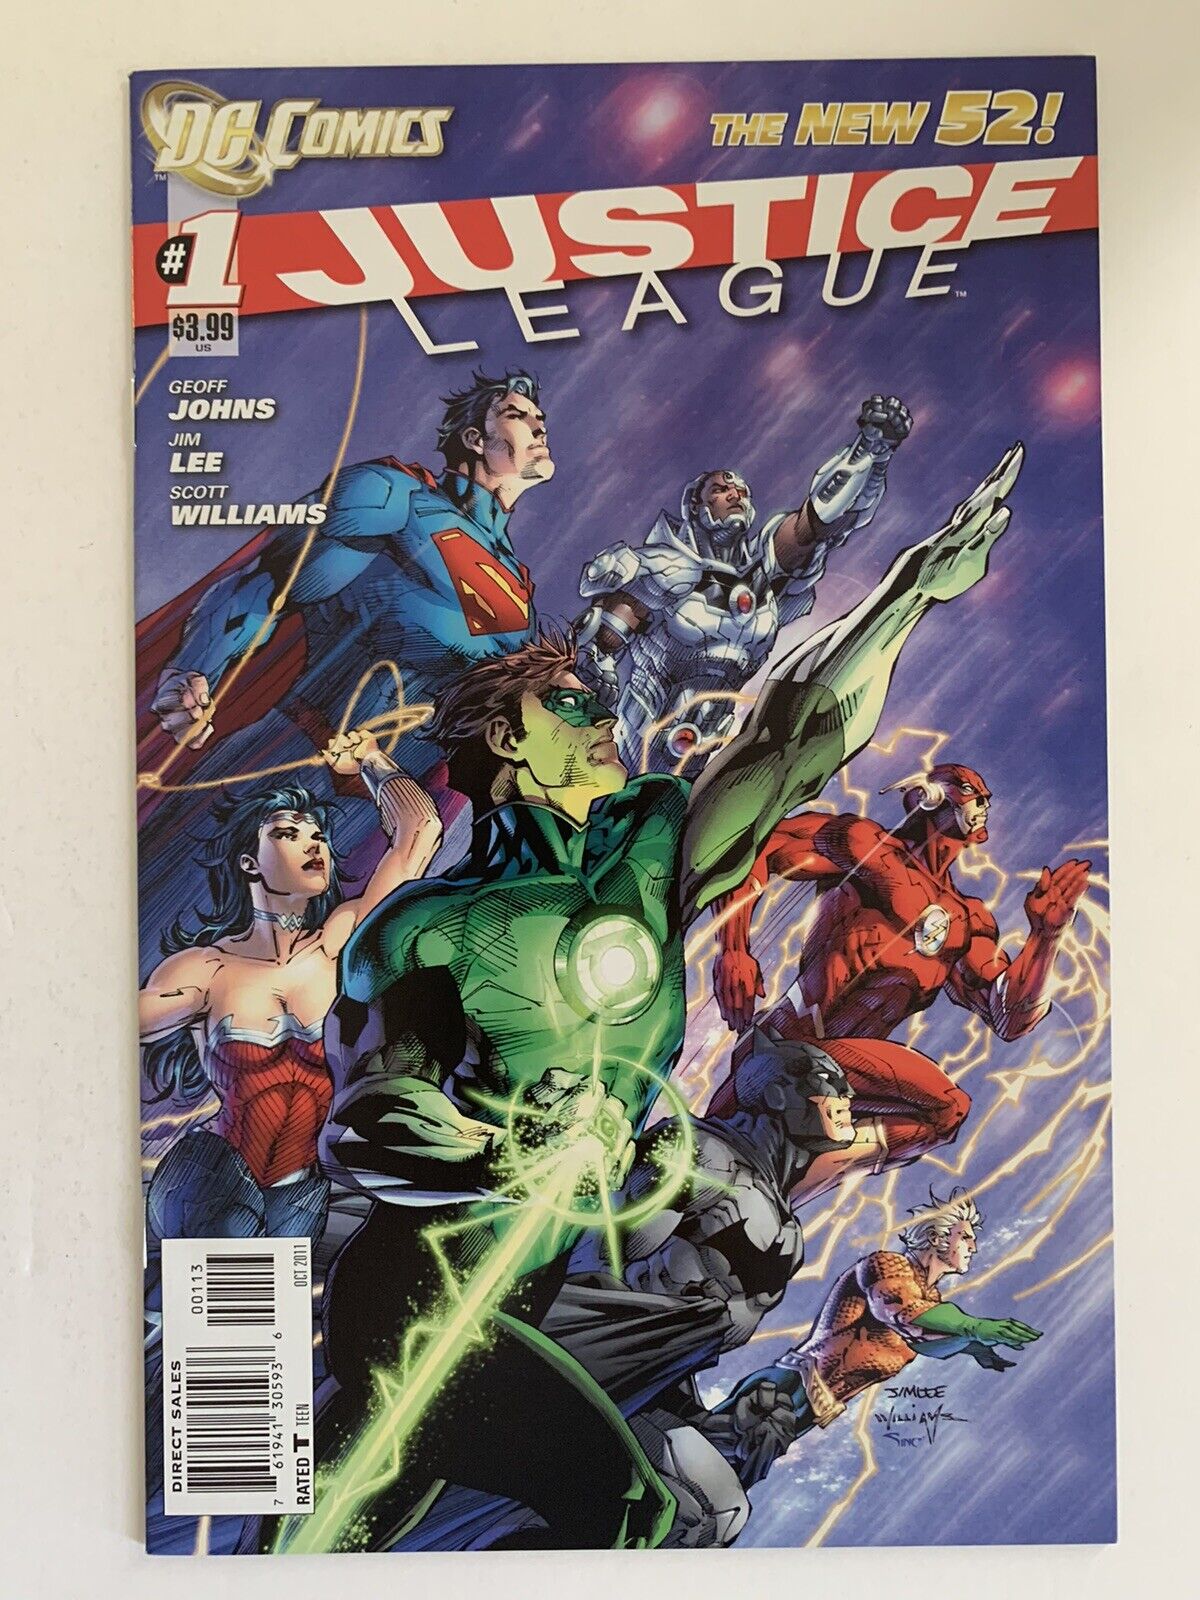 JUSTICE LEAGUE #1 9.4 NM 2011 3RD PRINT THE NEW 52 DC COMICS